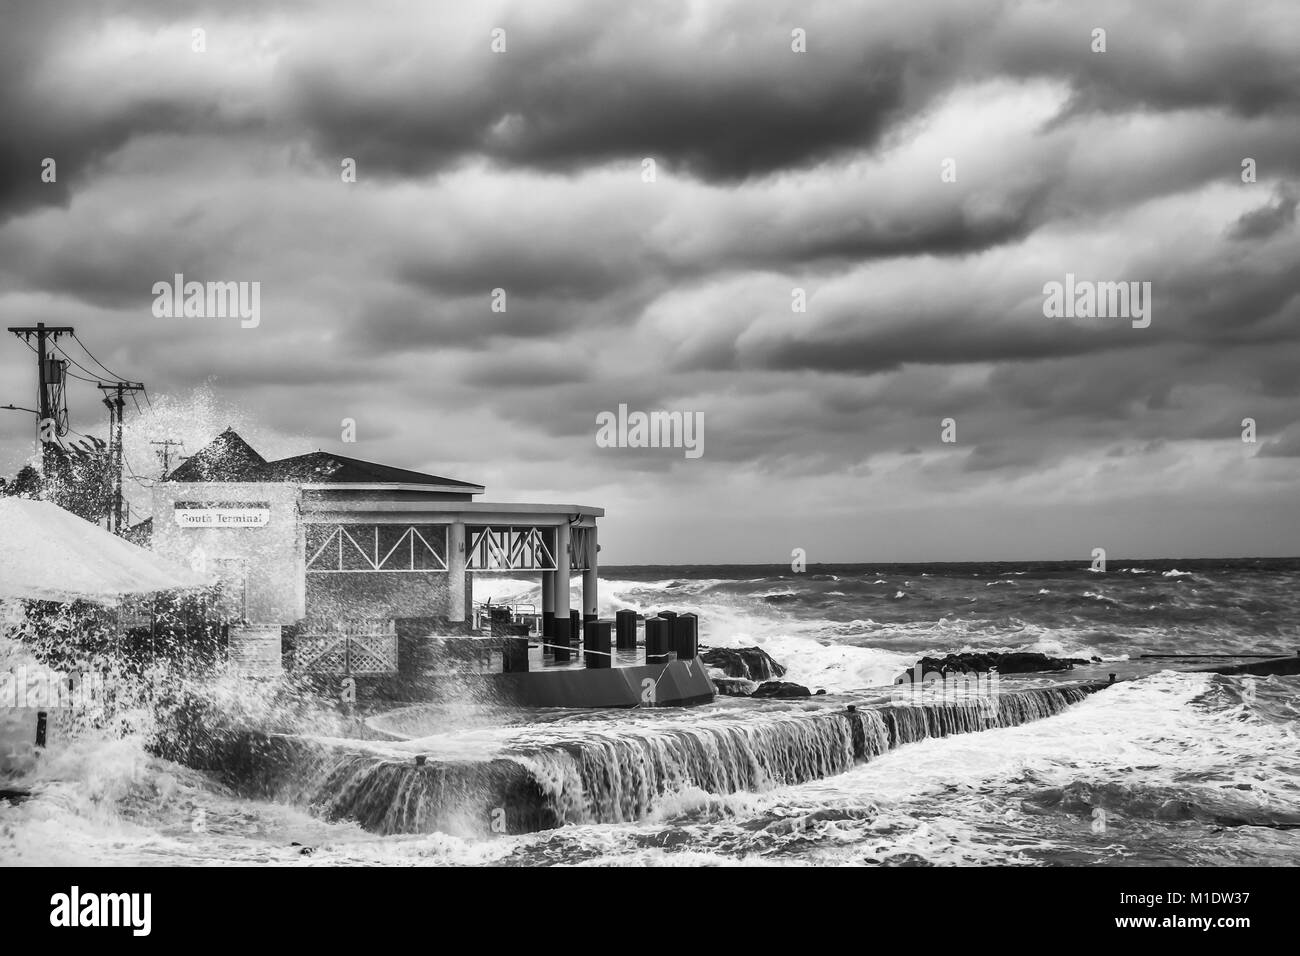 Storm over the Caribbean Sea by the South terminal of George Town Port, Grand Cayman, Cayman Islands Stock Photo